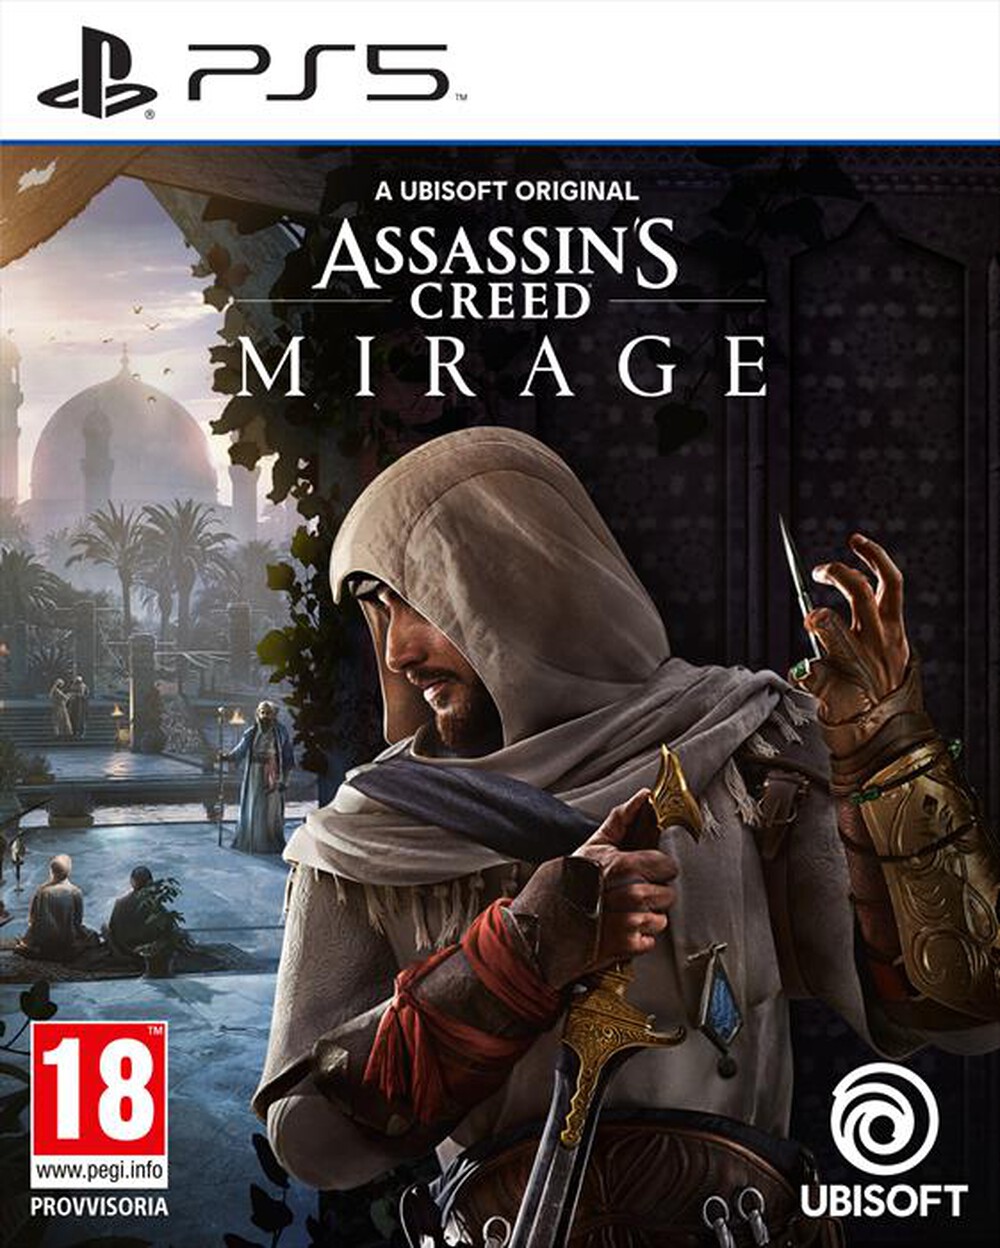 "UBISOFT - ASSASSIN'S CREED MIRAGE PS5"